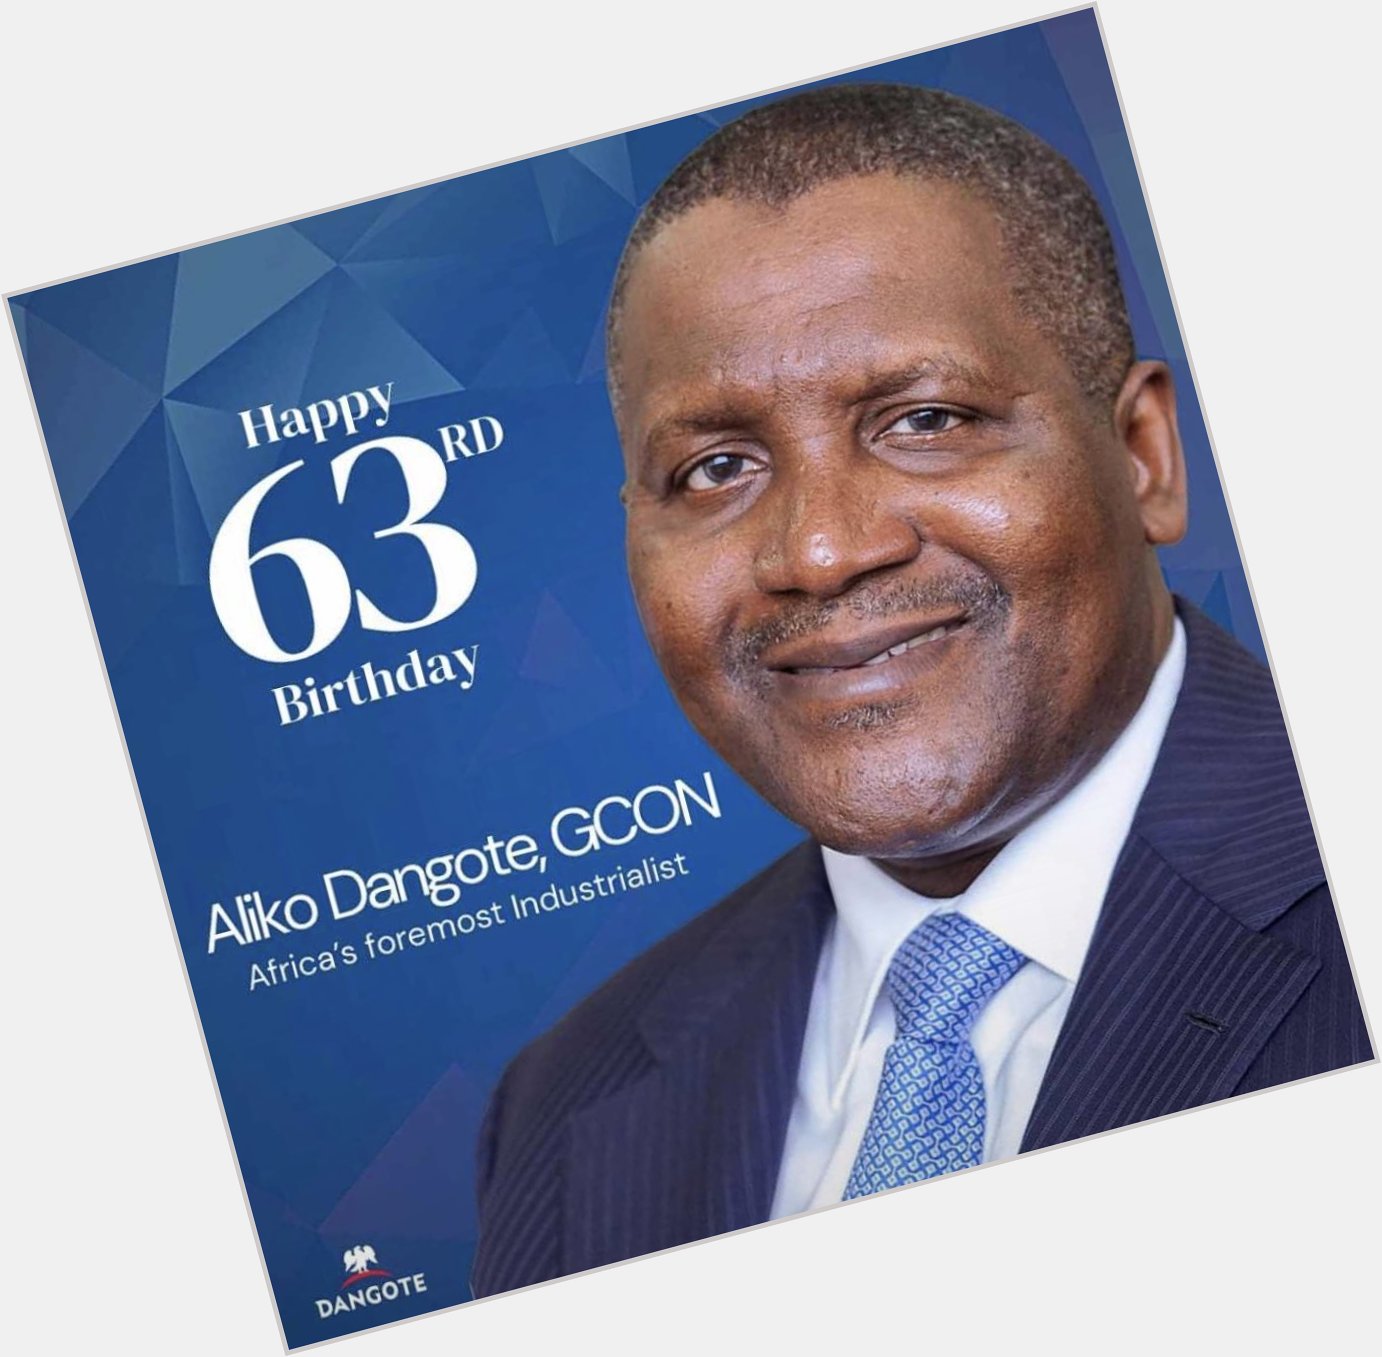 Happy 63rd birthday to an Icon and Philanthropist..
Aliko Dangote at 63... 